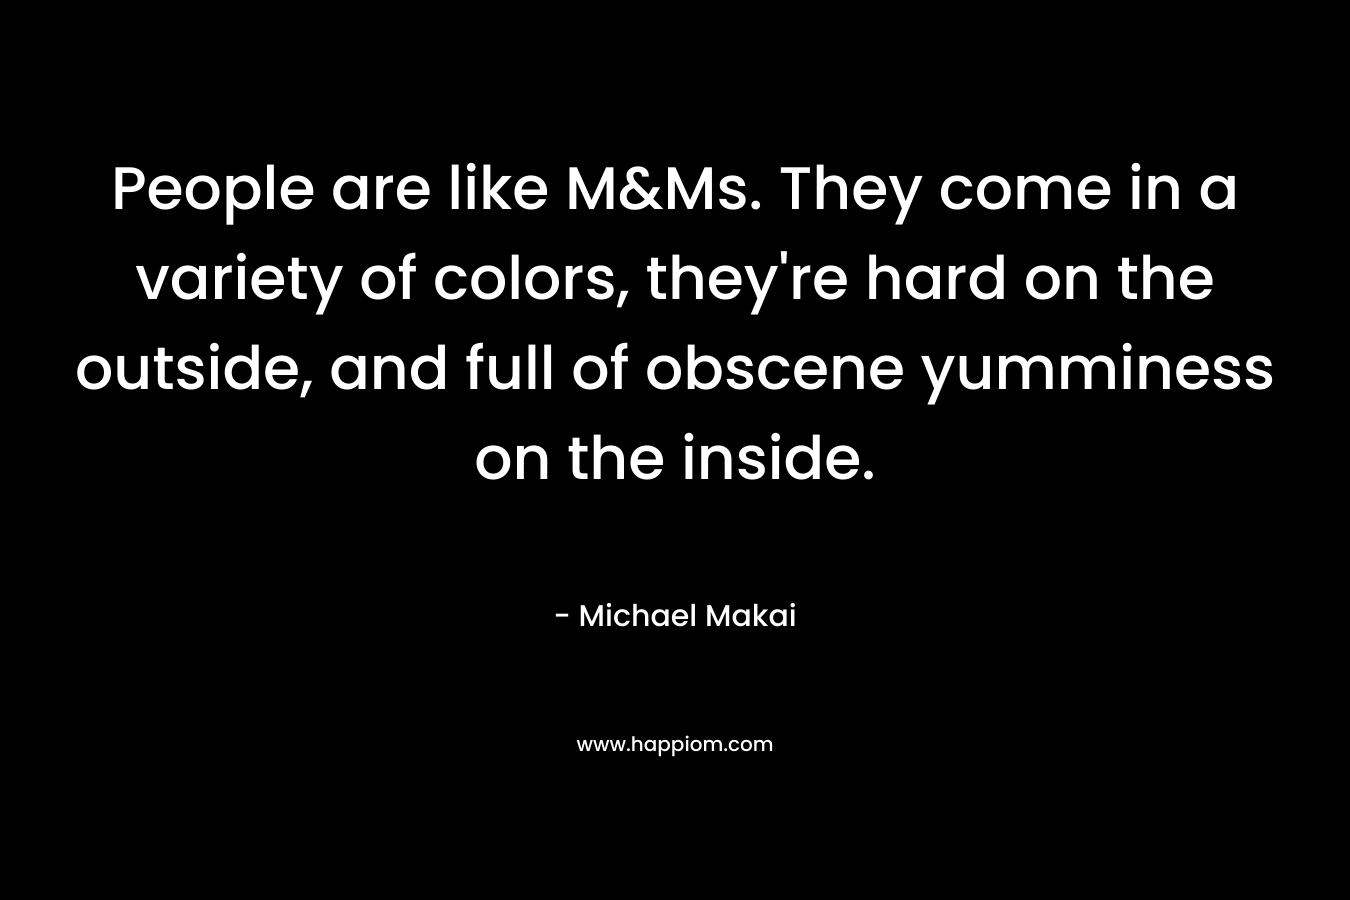 People are like M&Ms. They come in a variety of colors, they’re hard on the outside, and full of obscene yumminess on the inside. – Michael Makai